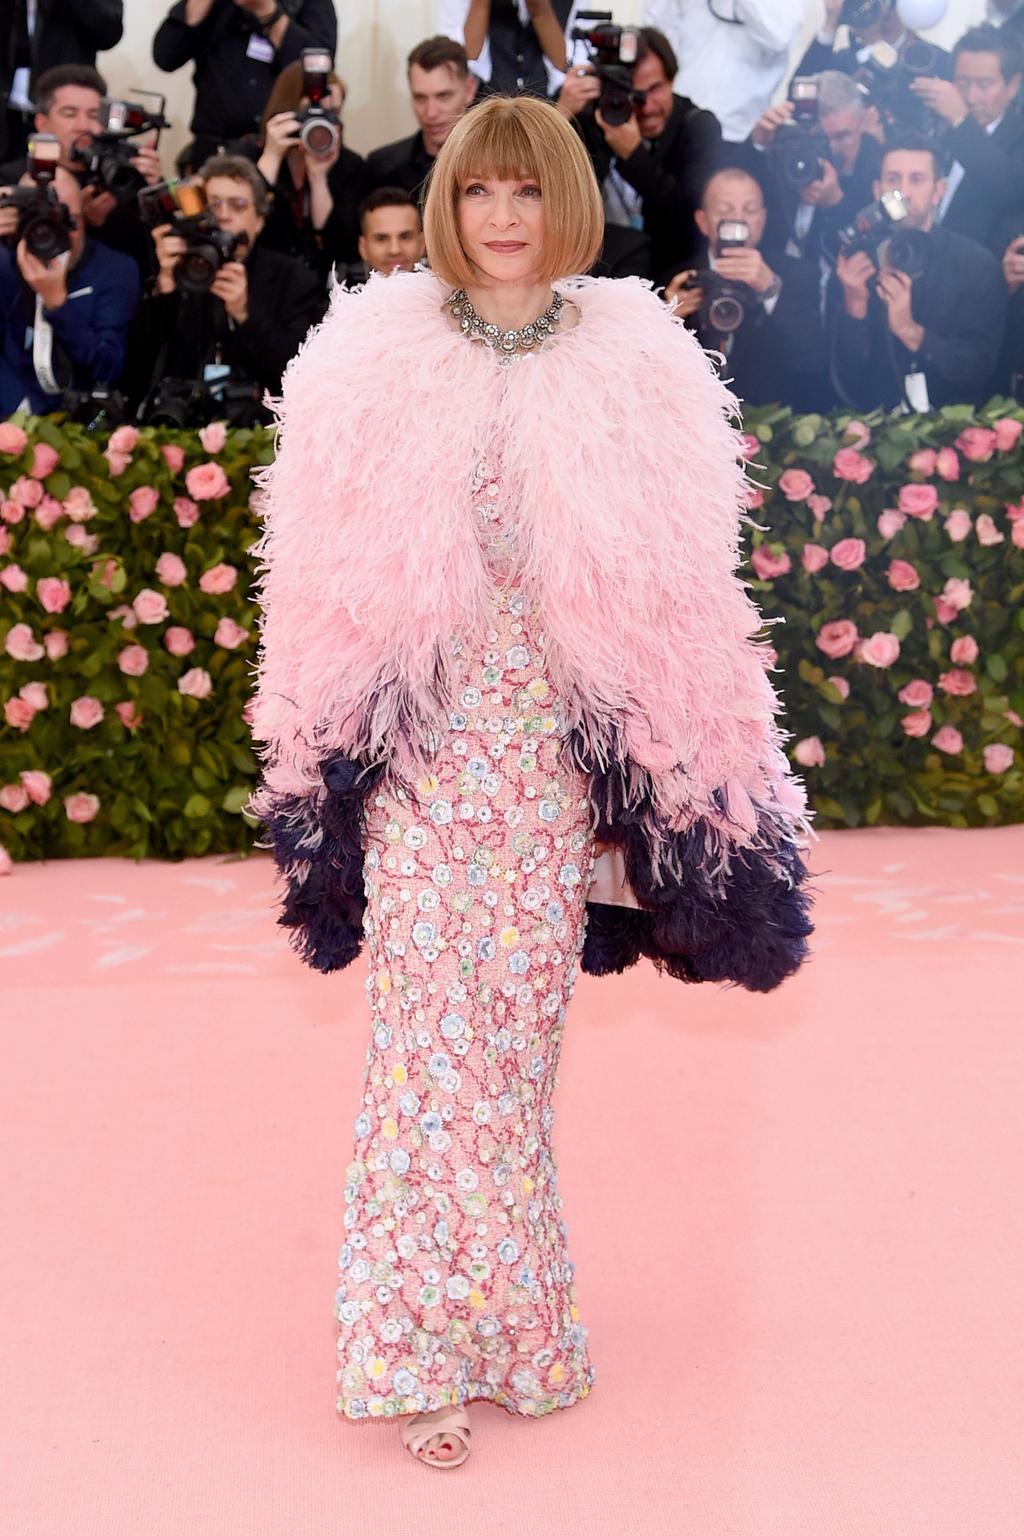 Met Gala 2019 All The Red Carpet Fashion Arrivals Vogue